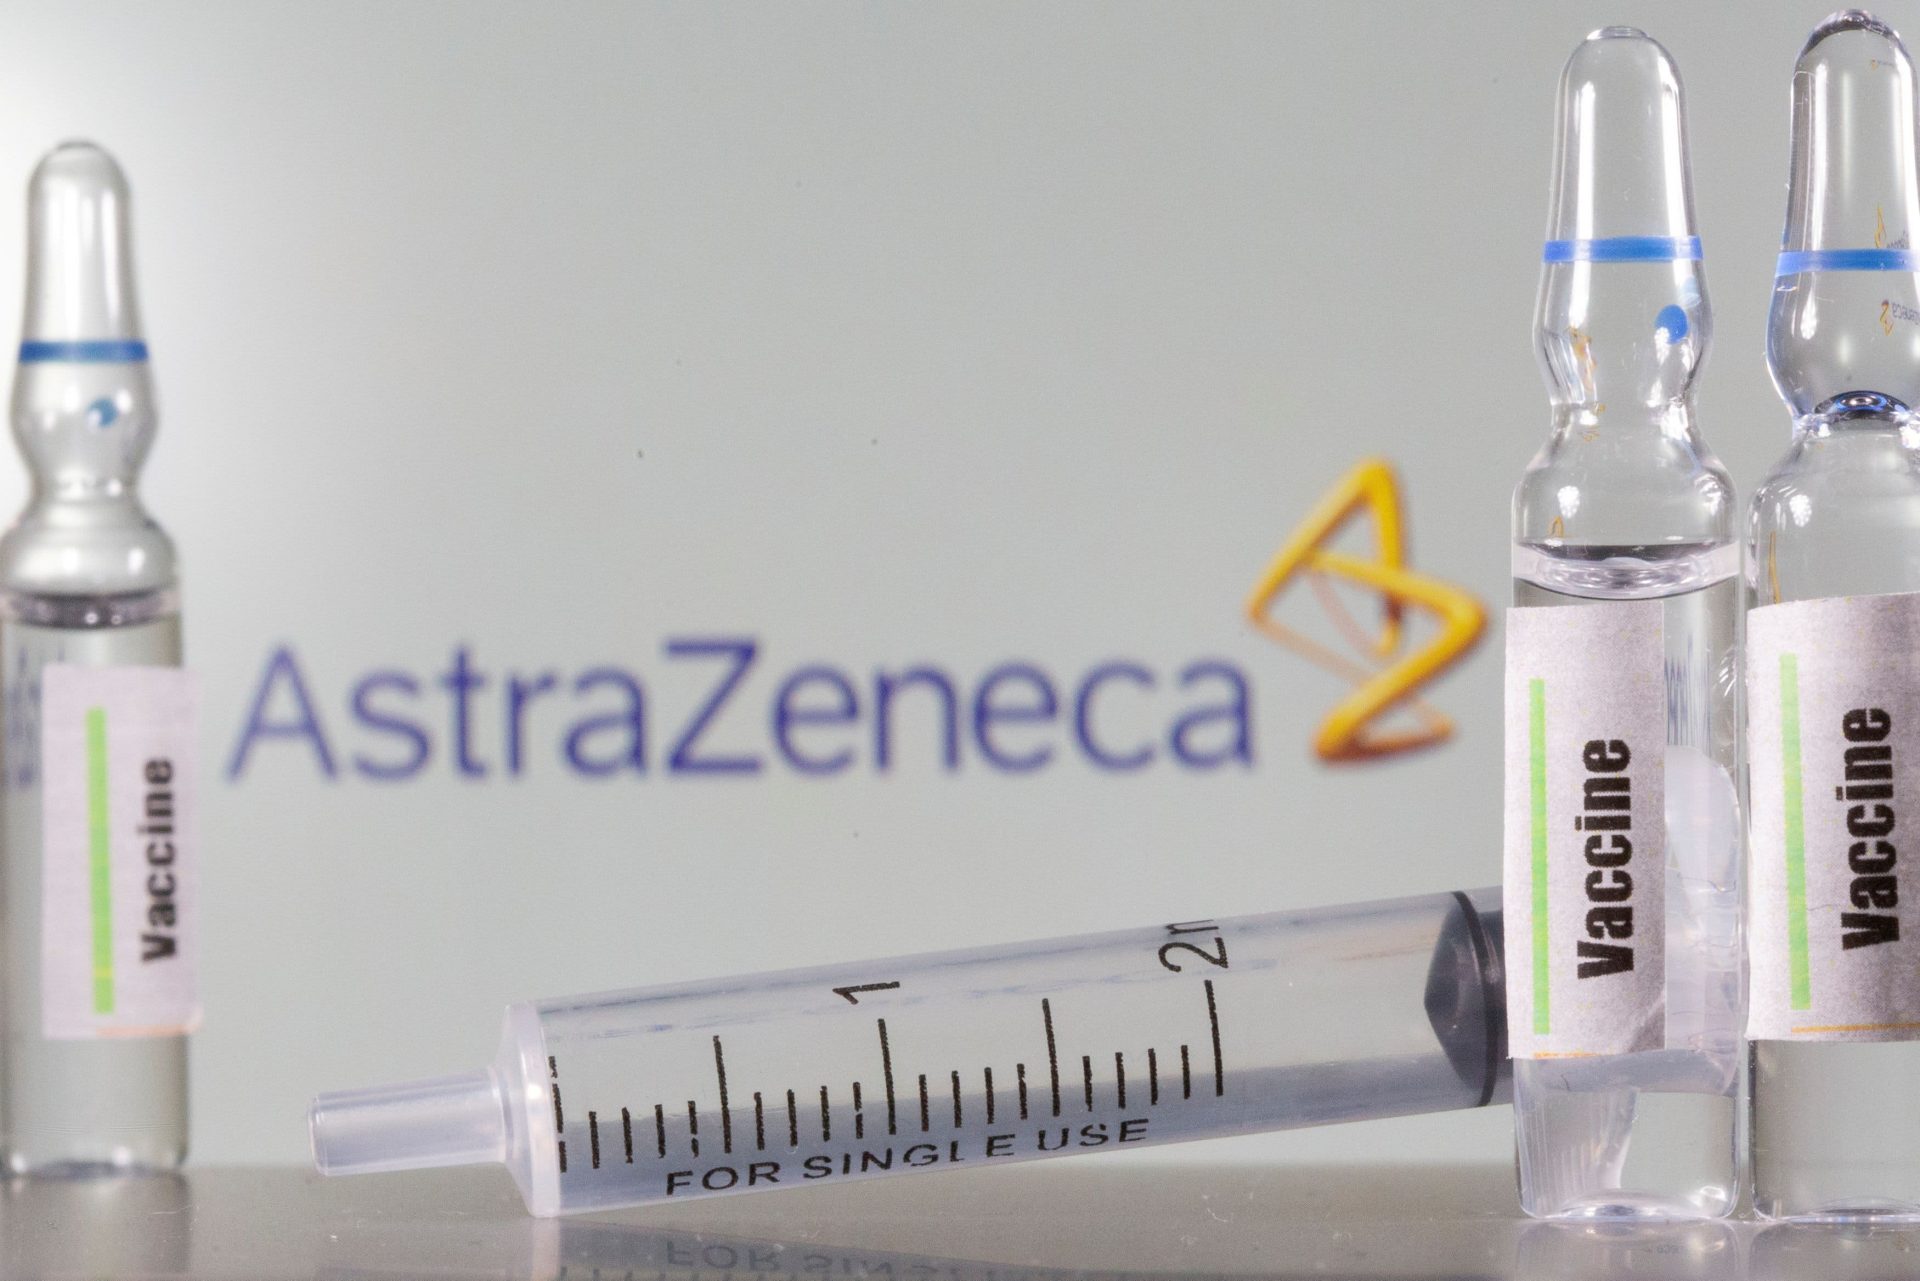 Oxford, WHO scientists notify extra records wished on AstraZeneca’s Covid vaccine trials